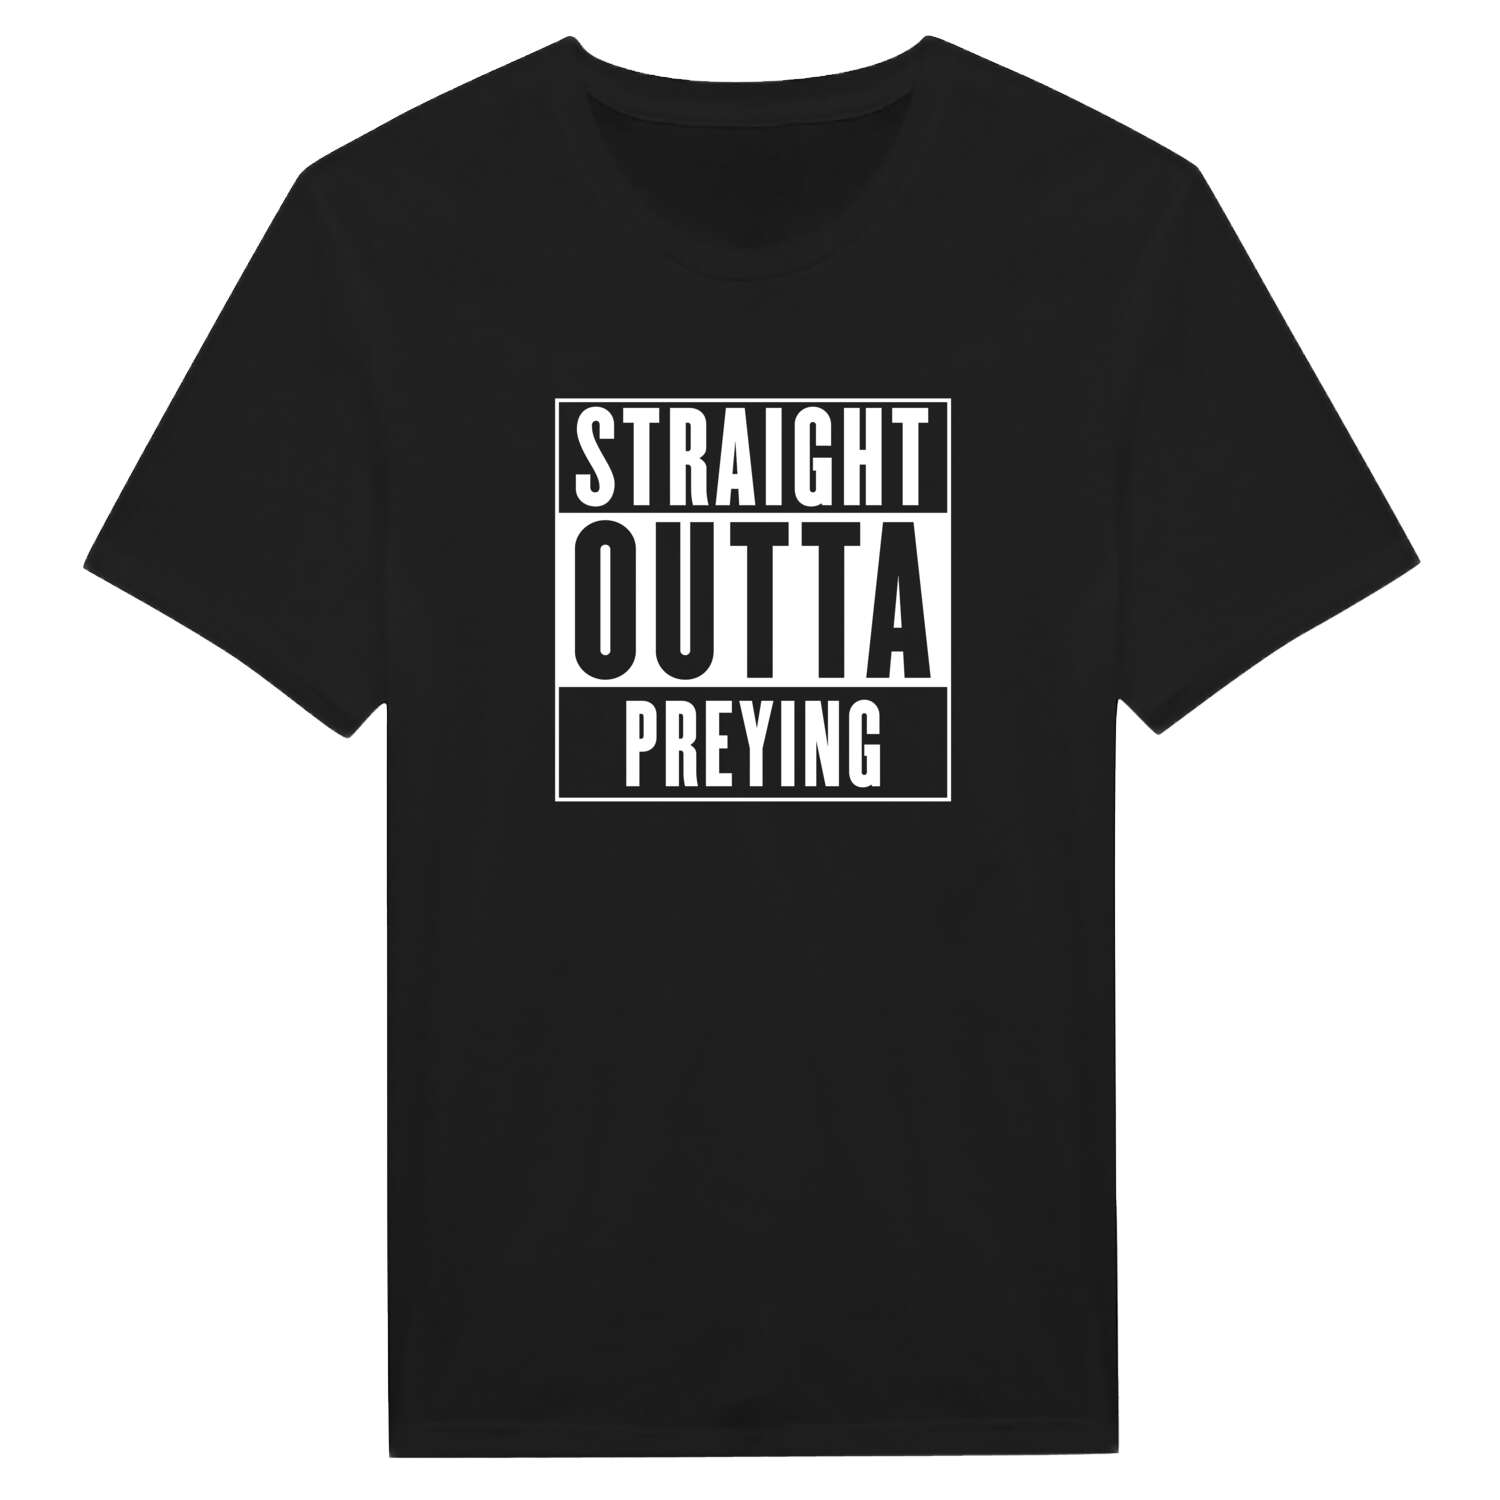 Preying T-Shirt »Straight Outta«